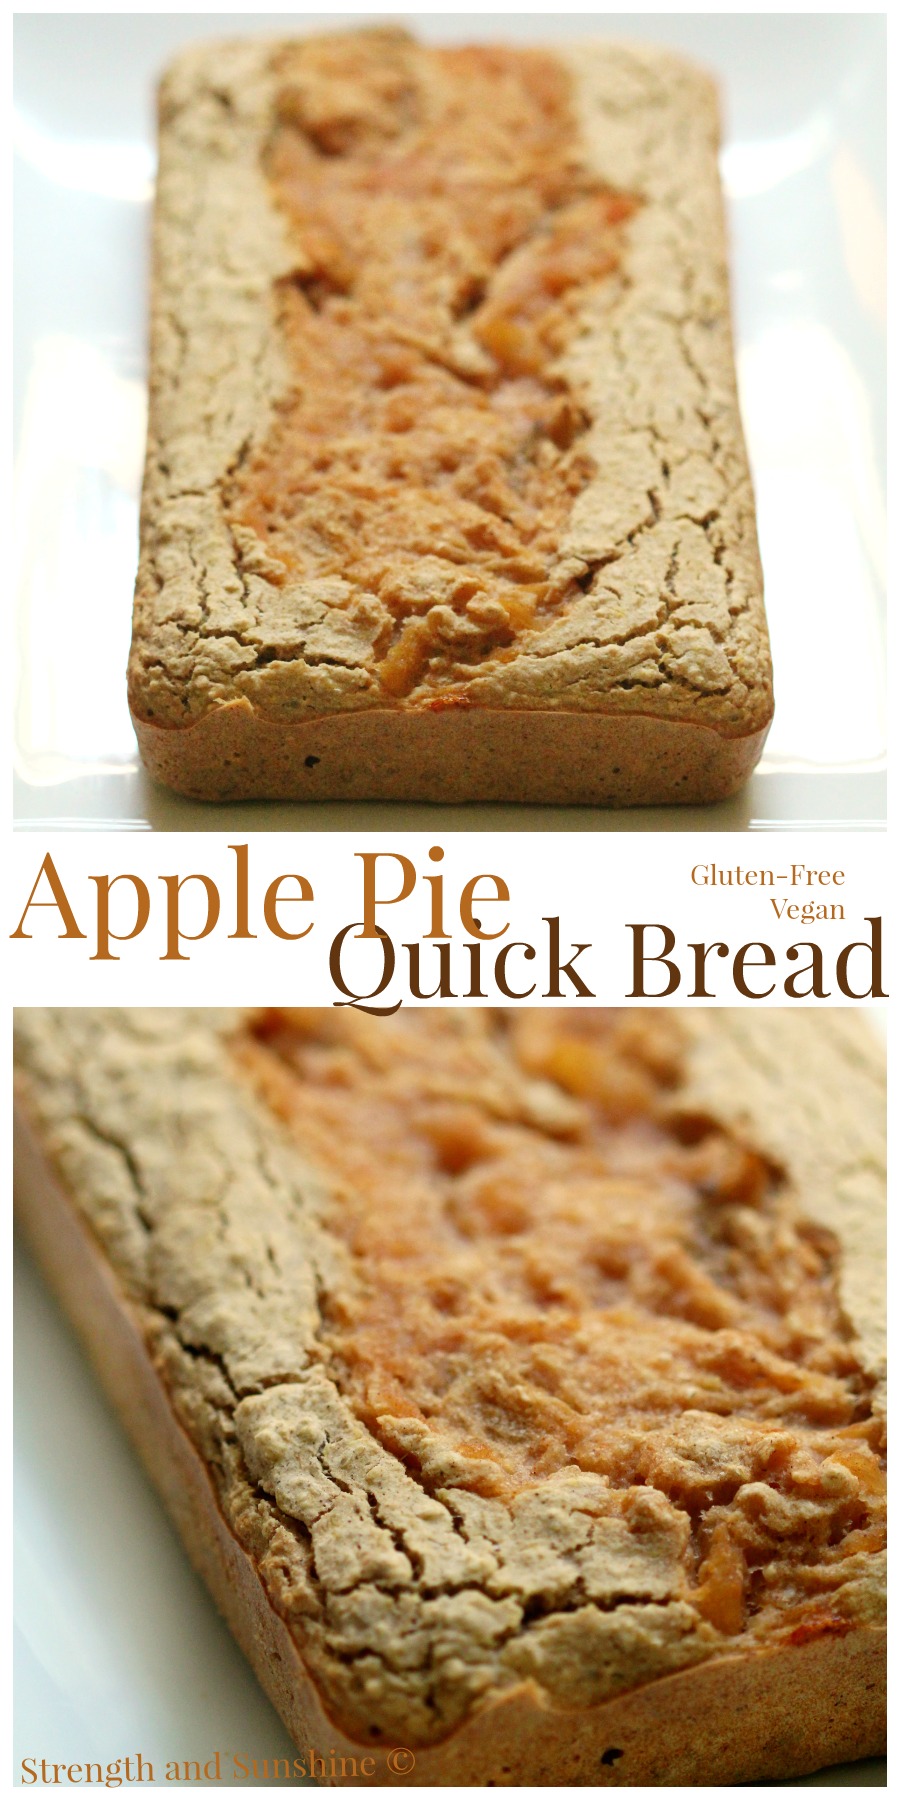 Apple Pie Quick Bread | Strength and Sunshine @RebeccaGF666 The sweet flavors of apple pie transformed into a healthy gluten-free vegan quick bread! This apple pie quick bread recipe is the perfect autumn breakfast, snack, or even dessert!